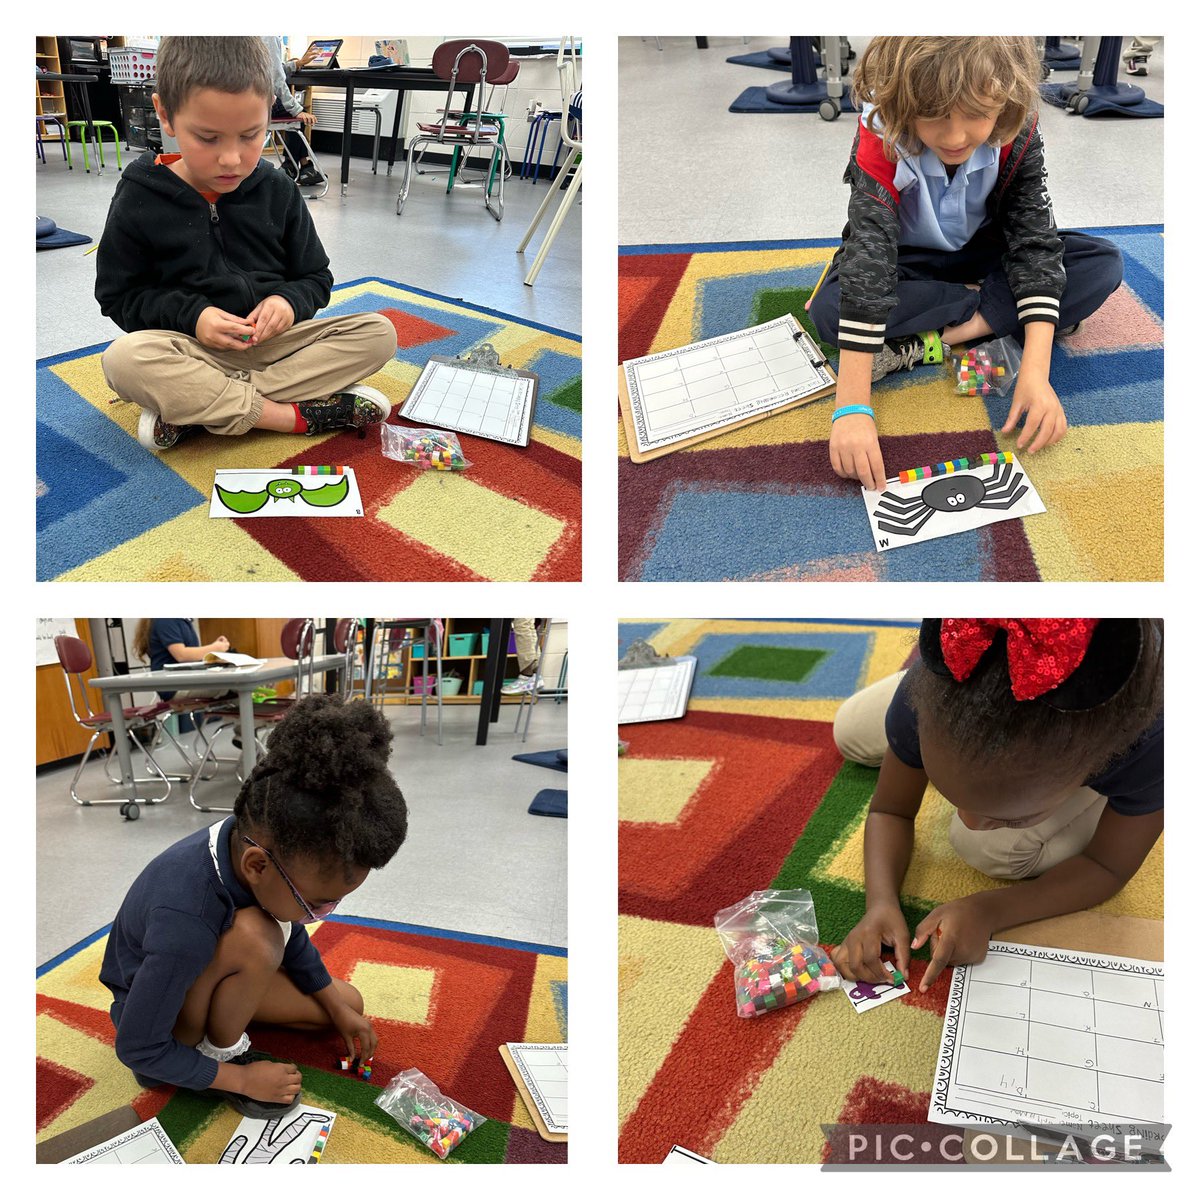 Unit 3 is in full swing in math groups. Students are measuring spooky creatures using ones units to help make the correlation to centimeters in a future lesson. #creekSTANDARD @Tigers_TCE @kellyedgington5 @GilmoreKenyatta